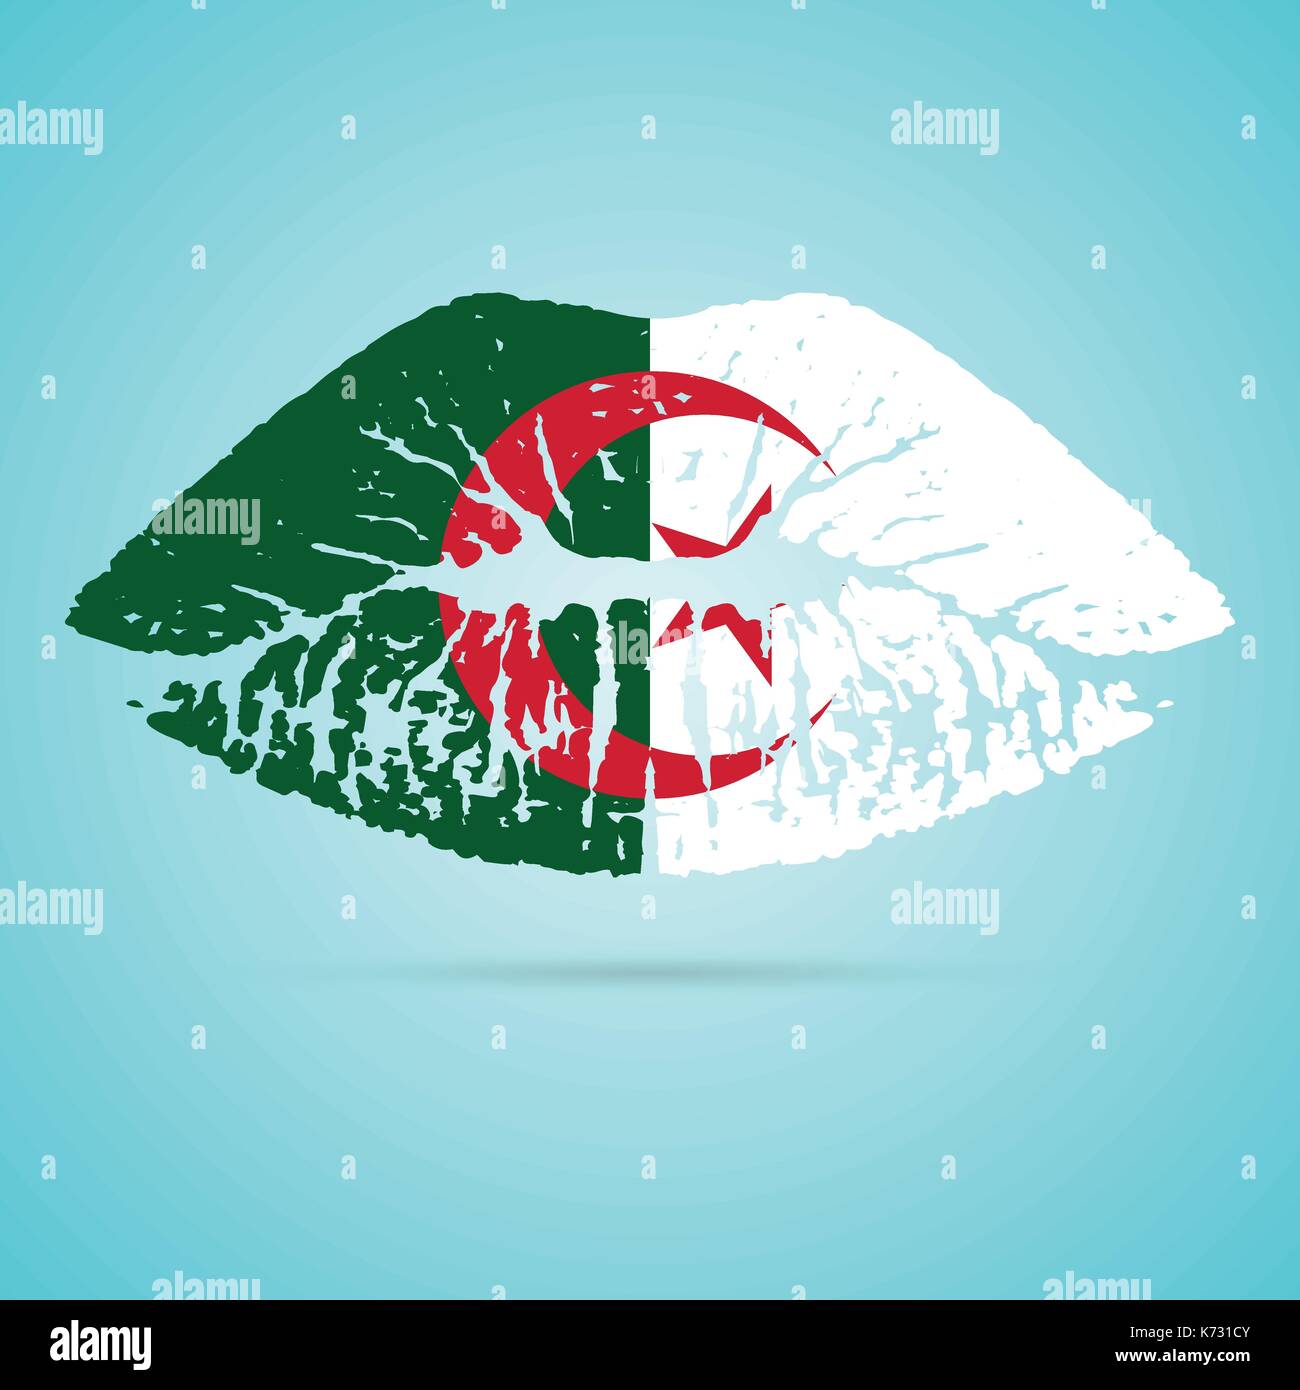 Algeria Flag Lipstick On The Lips Isolated On A White Background. Vector Illustration. Stock Vector